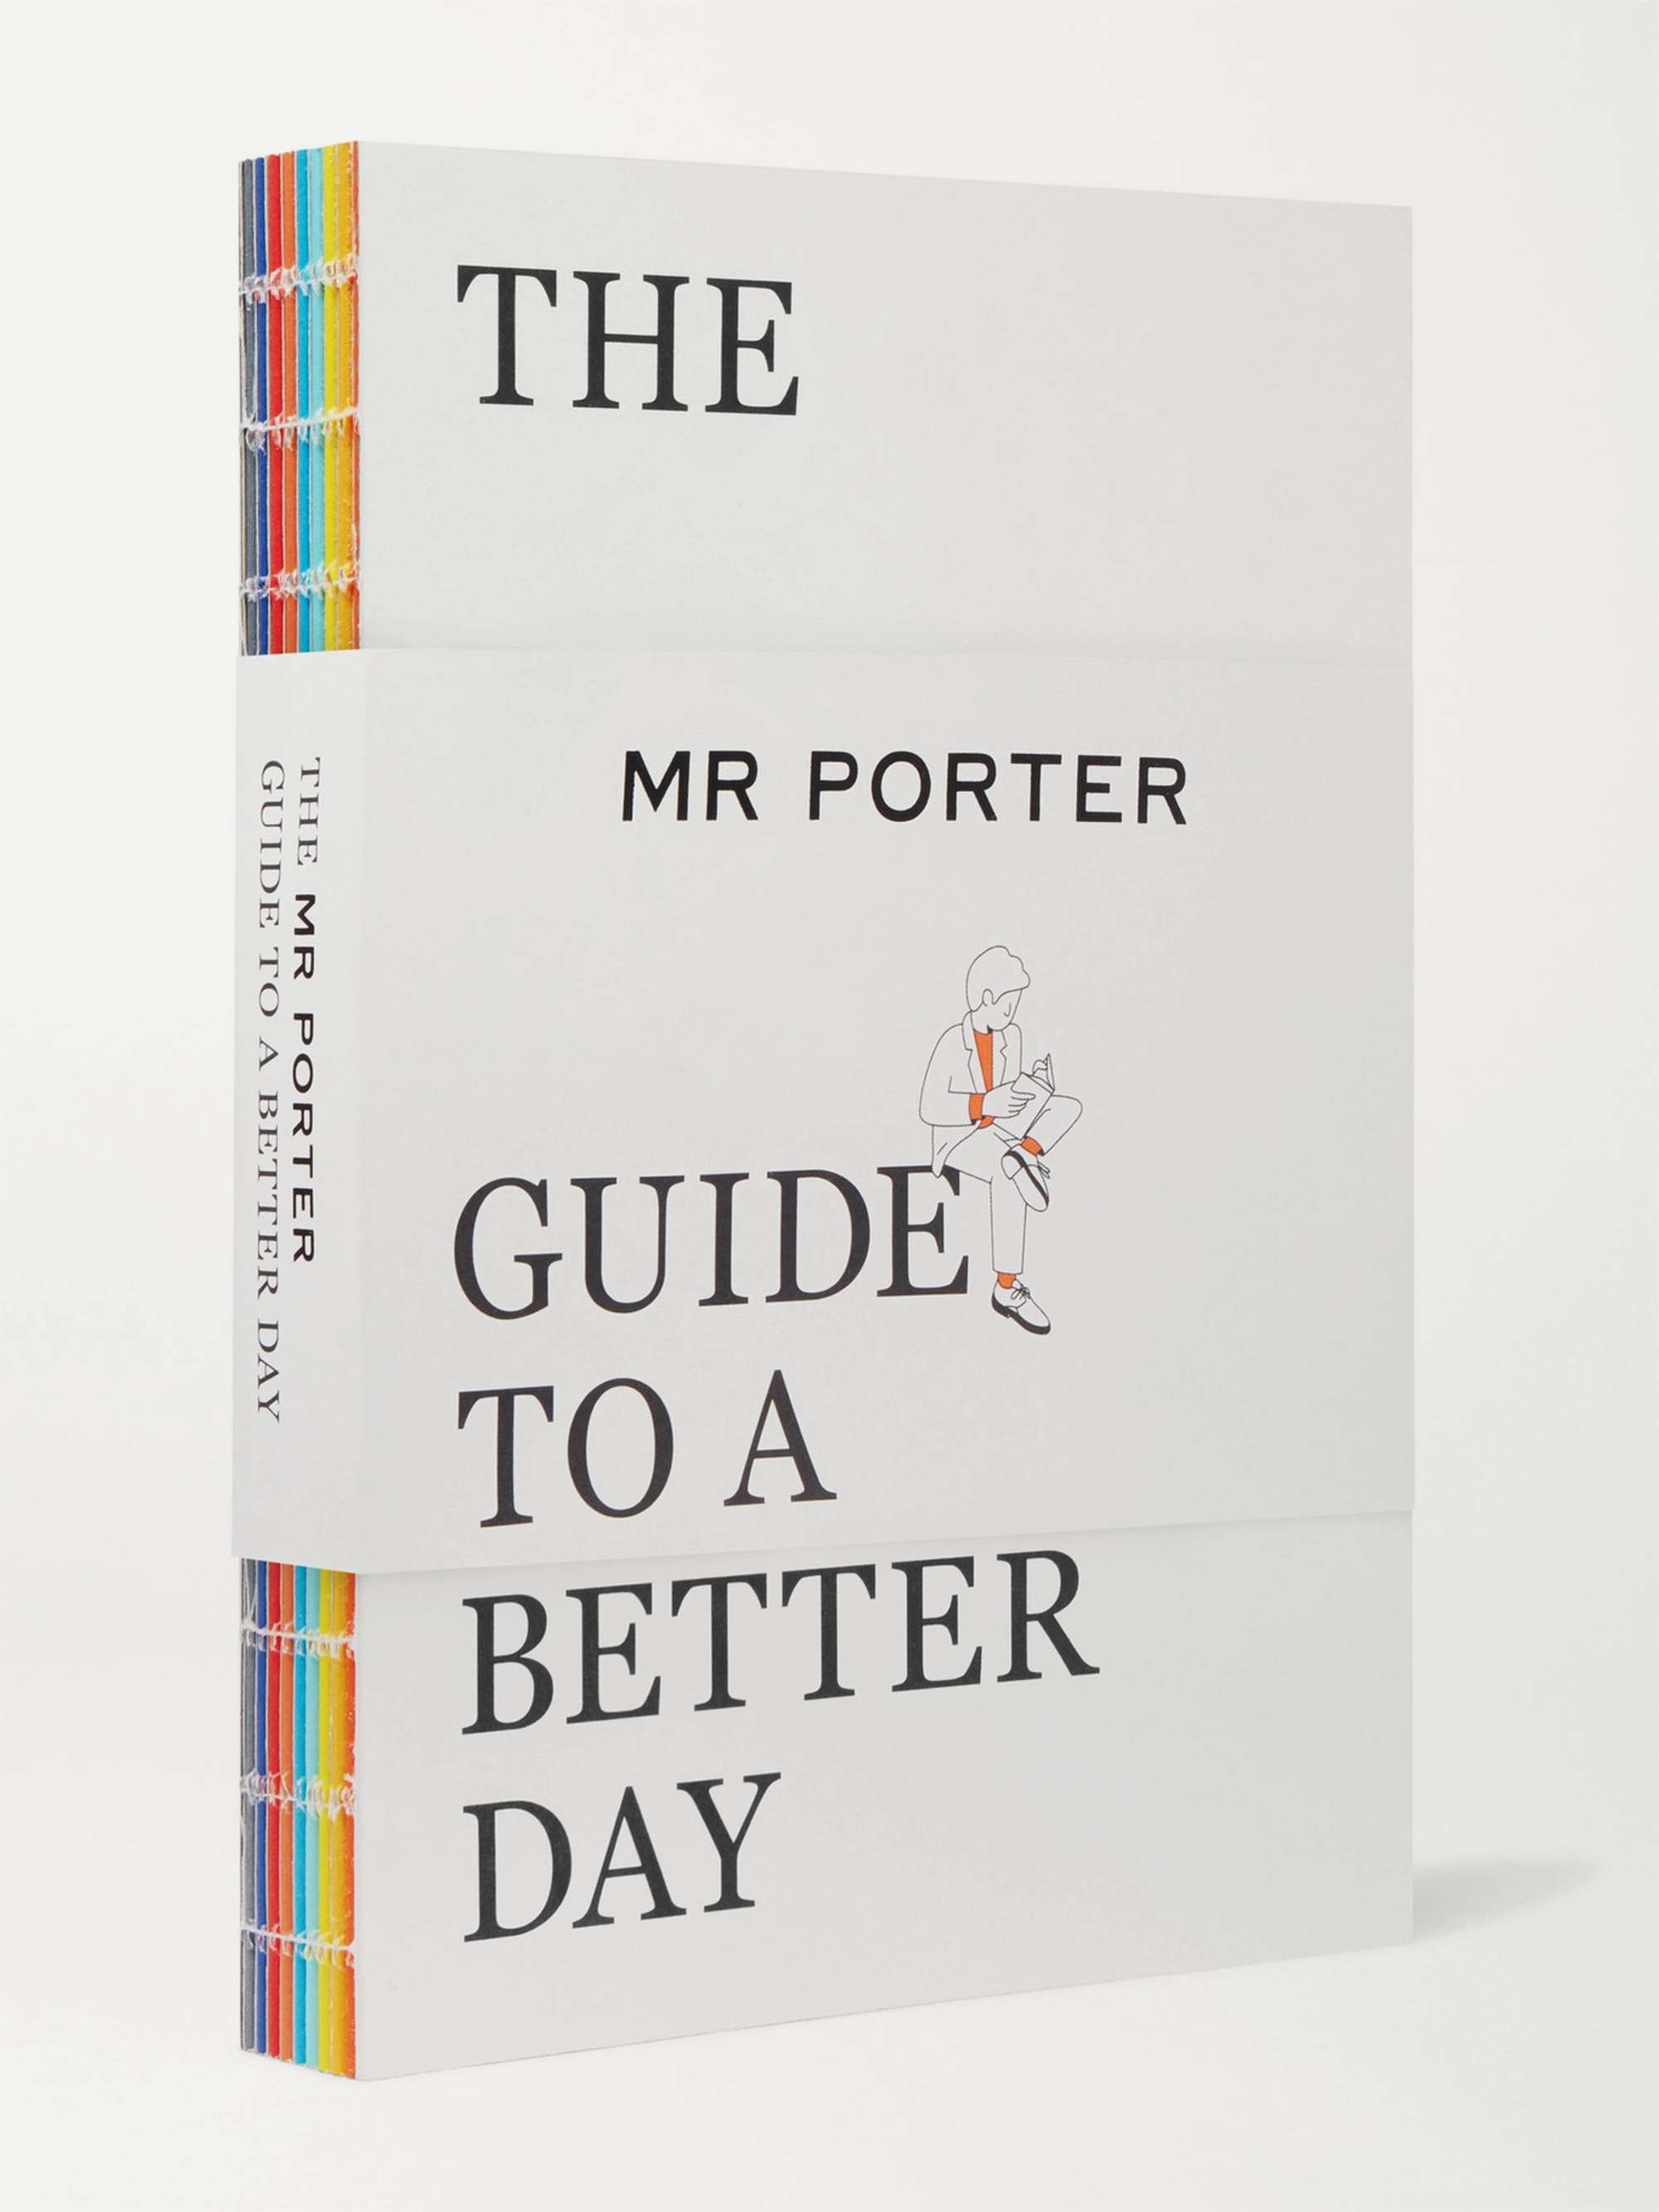 THE MR PORTER PAPERBACK The MR PORTER Guide to a Better Day Paperback Book